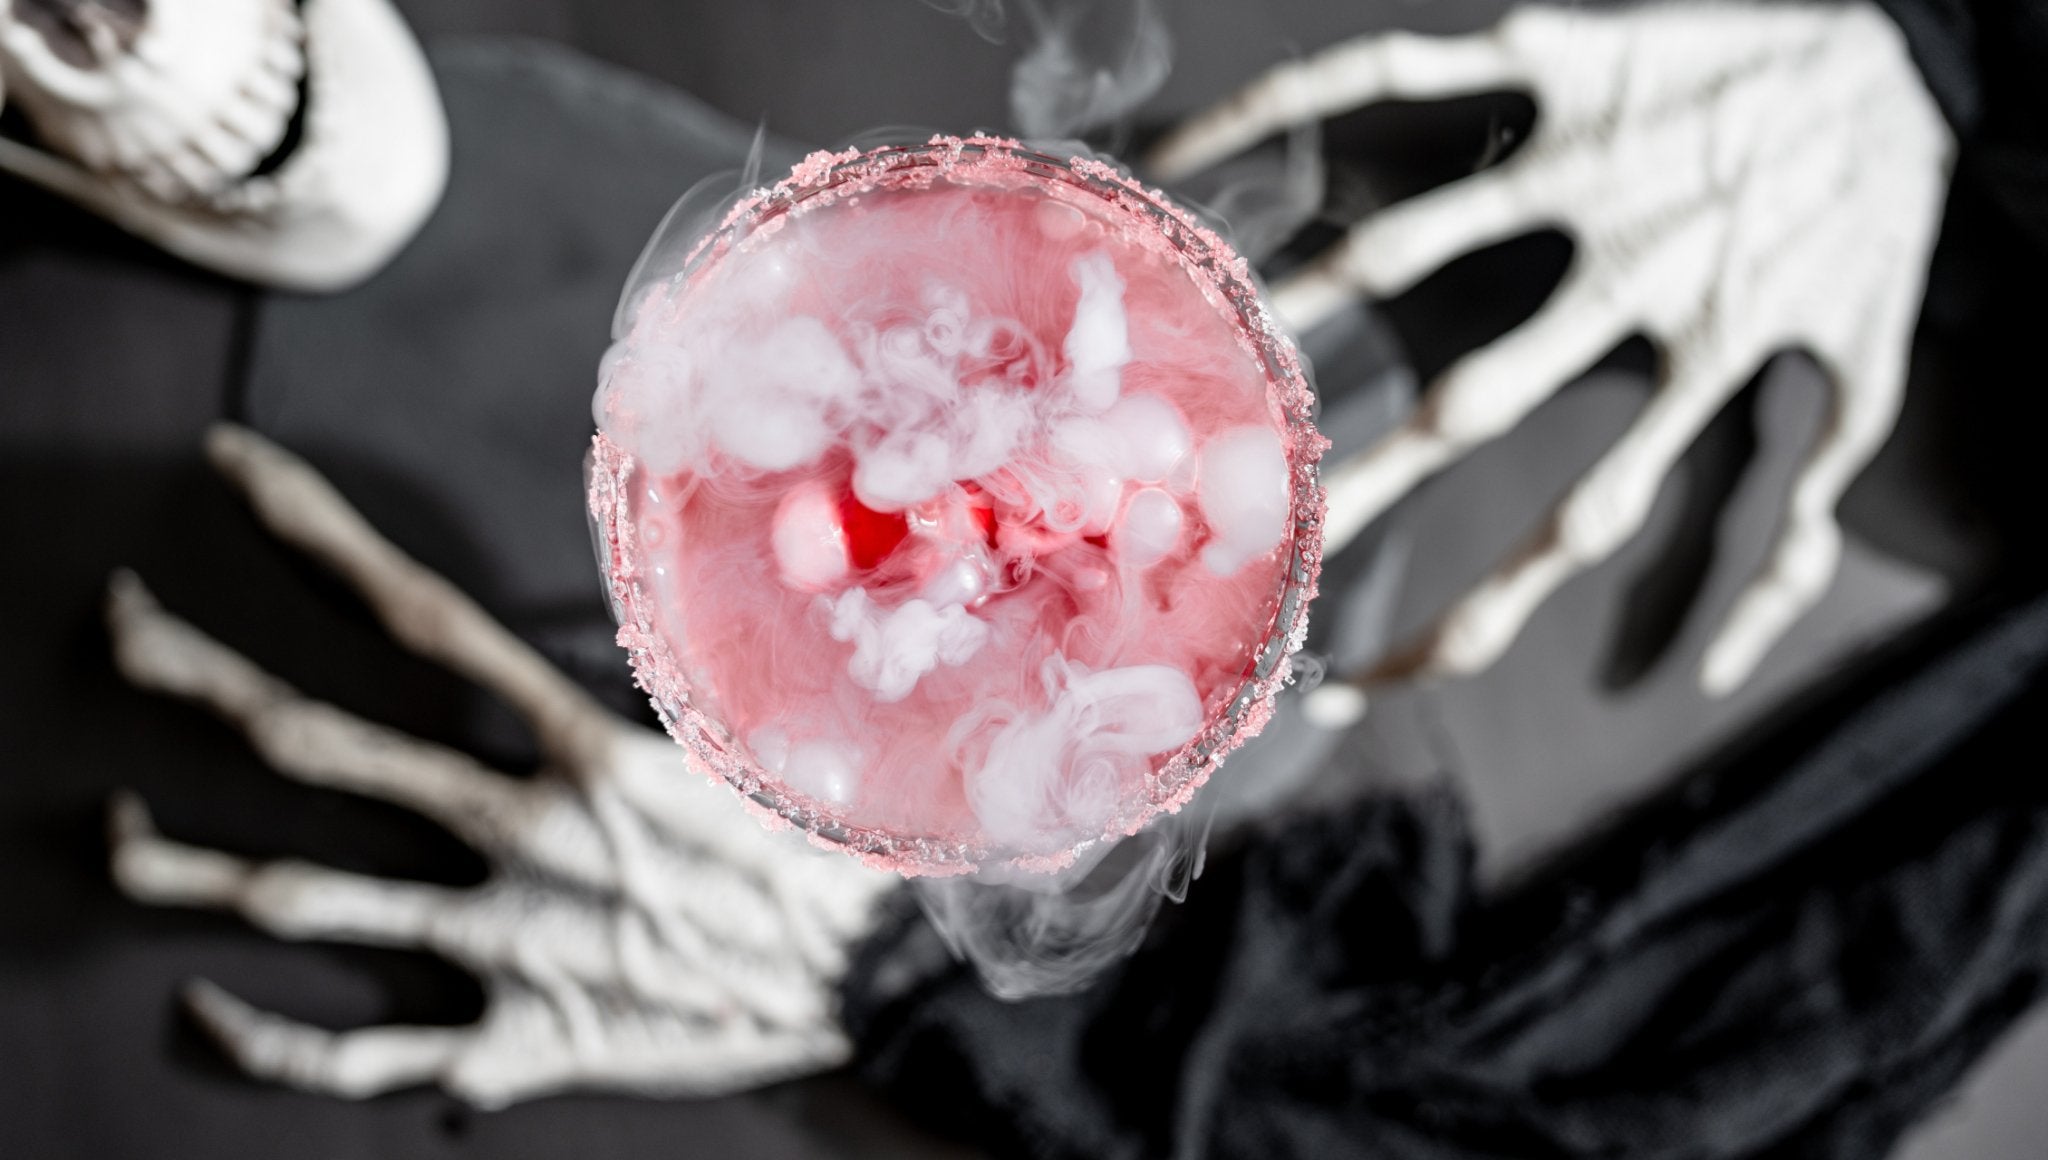 Chilled-Thrills-Safely-Mastering-Dry-Ice-in-Your-Halloween-Cocktails The Bottle Club